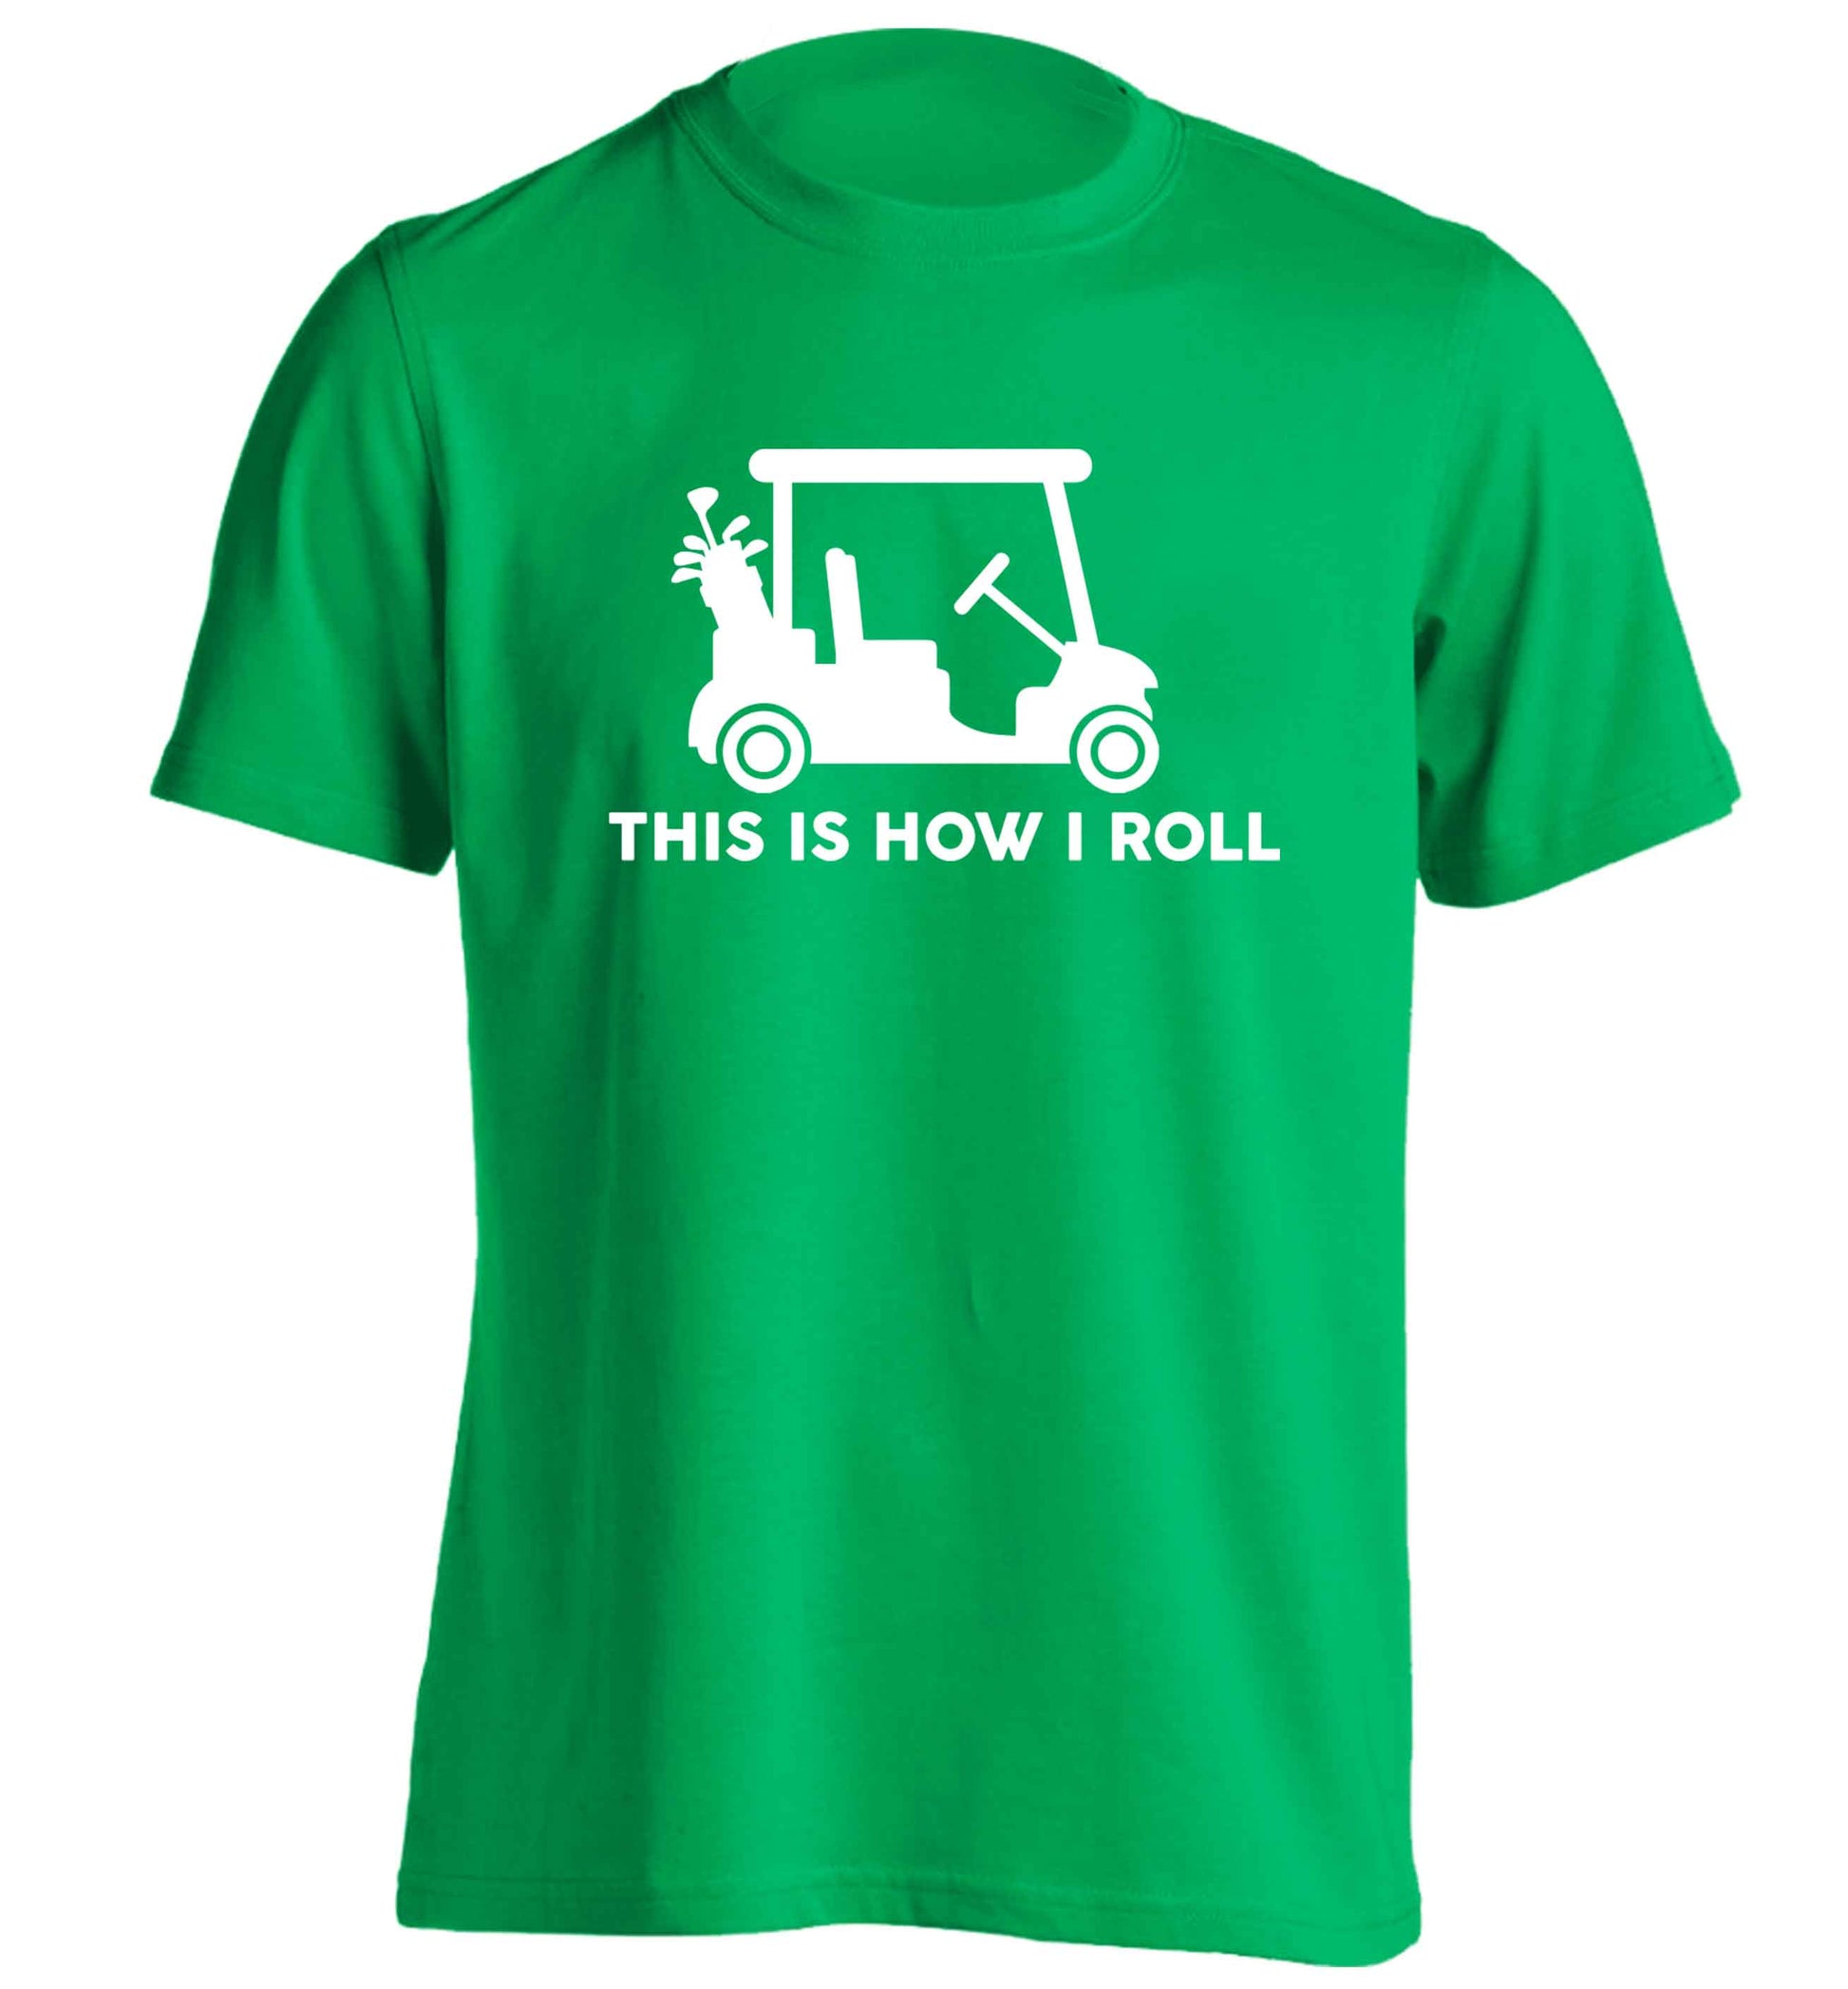 This is how I roll golf cart adults unisex green Tshirt 2XL